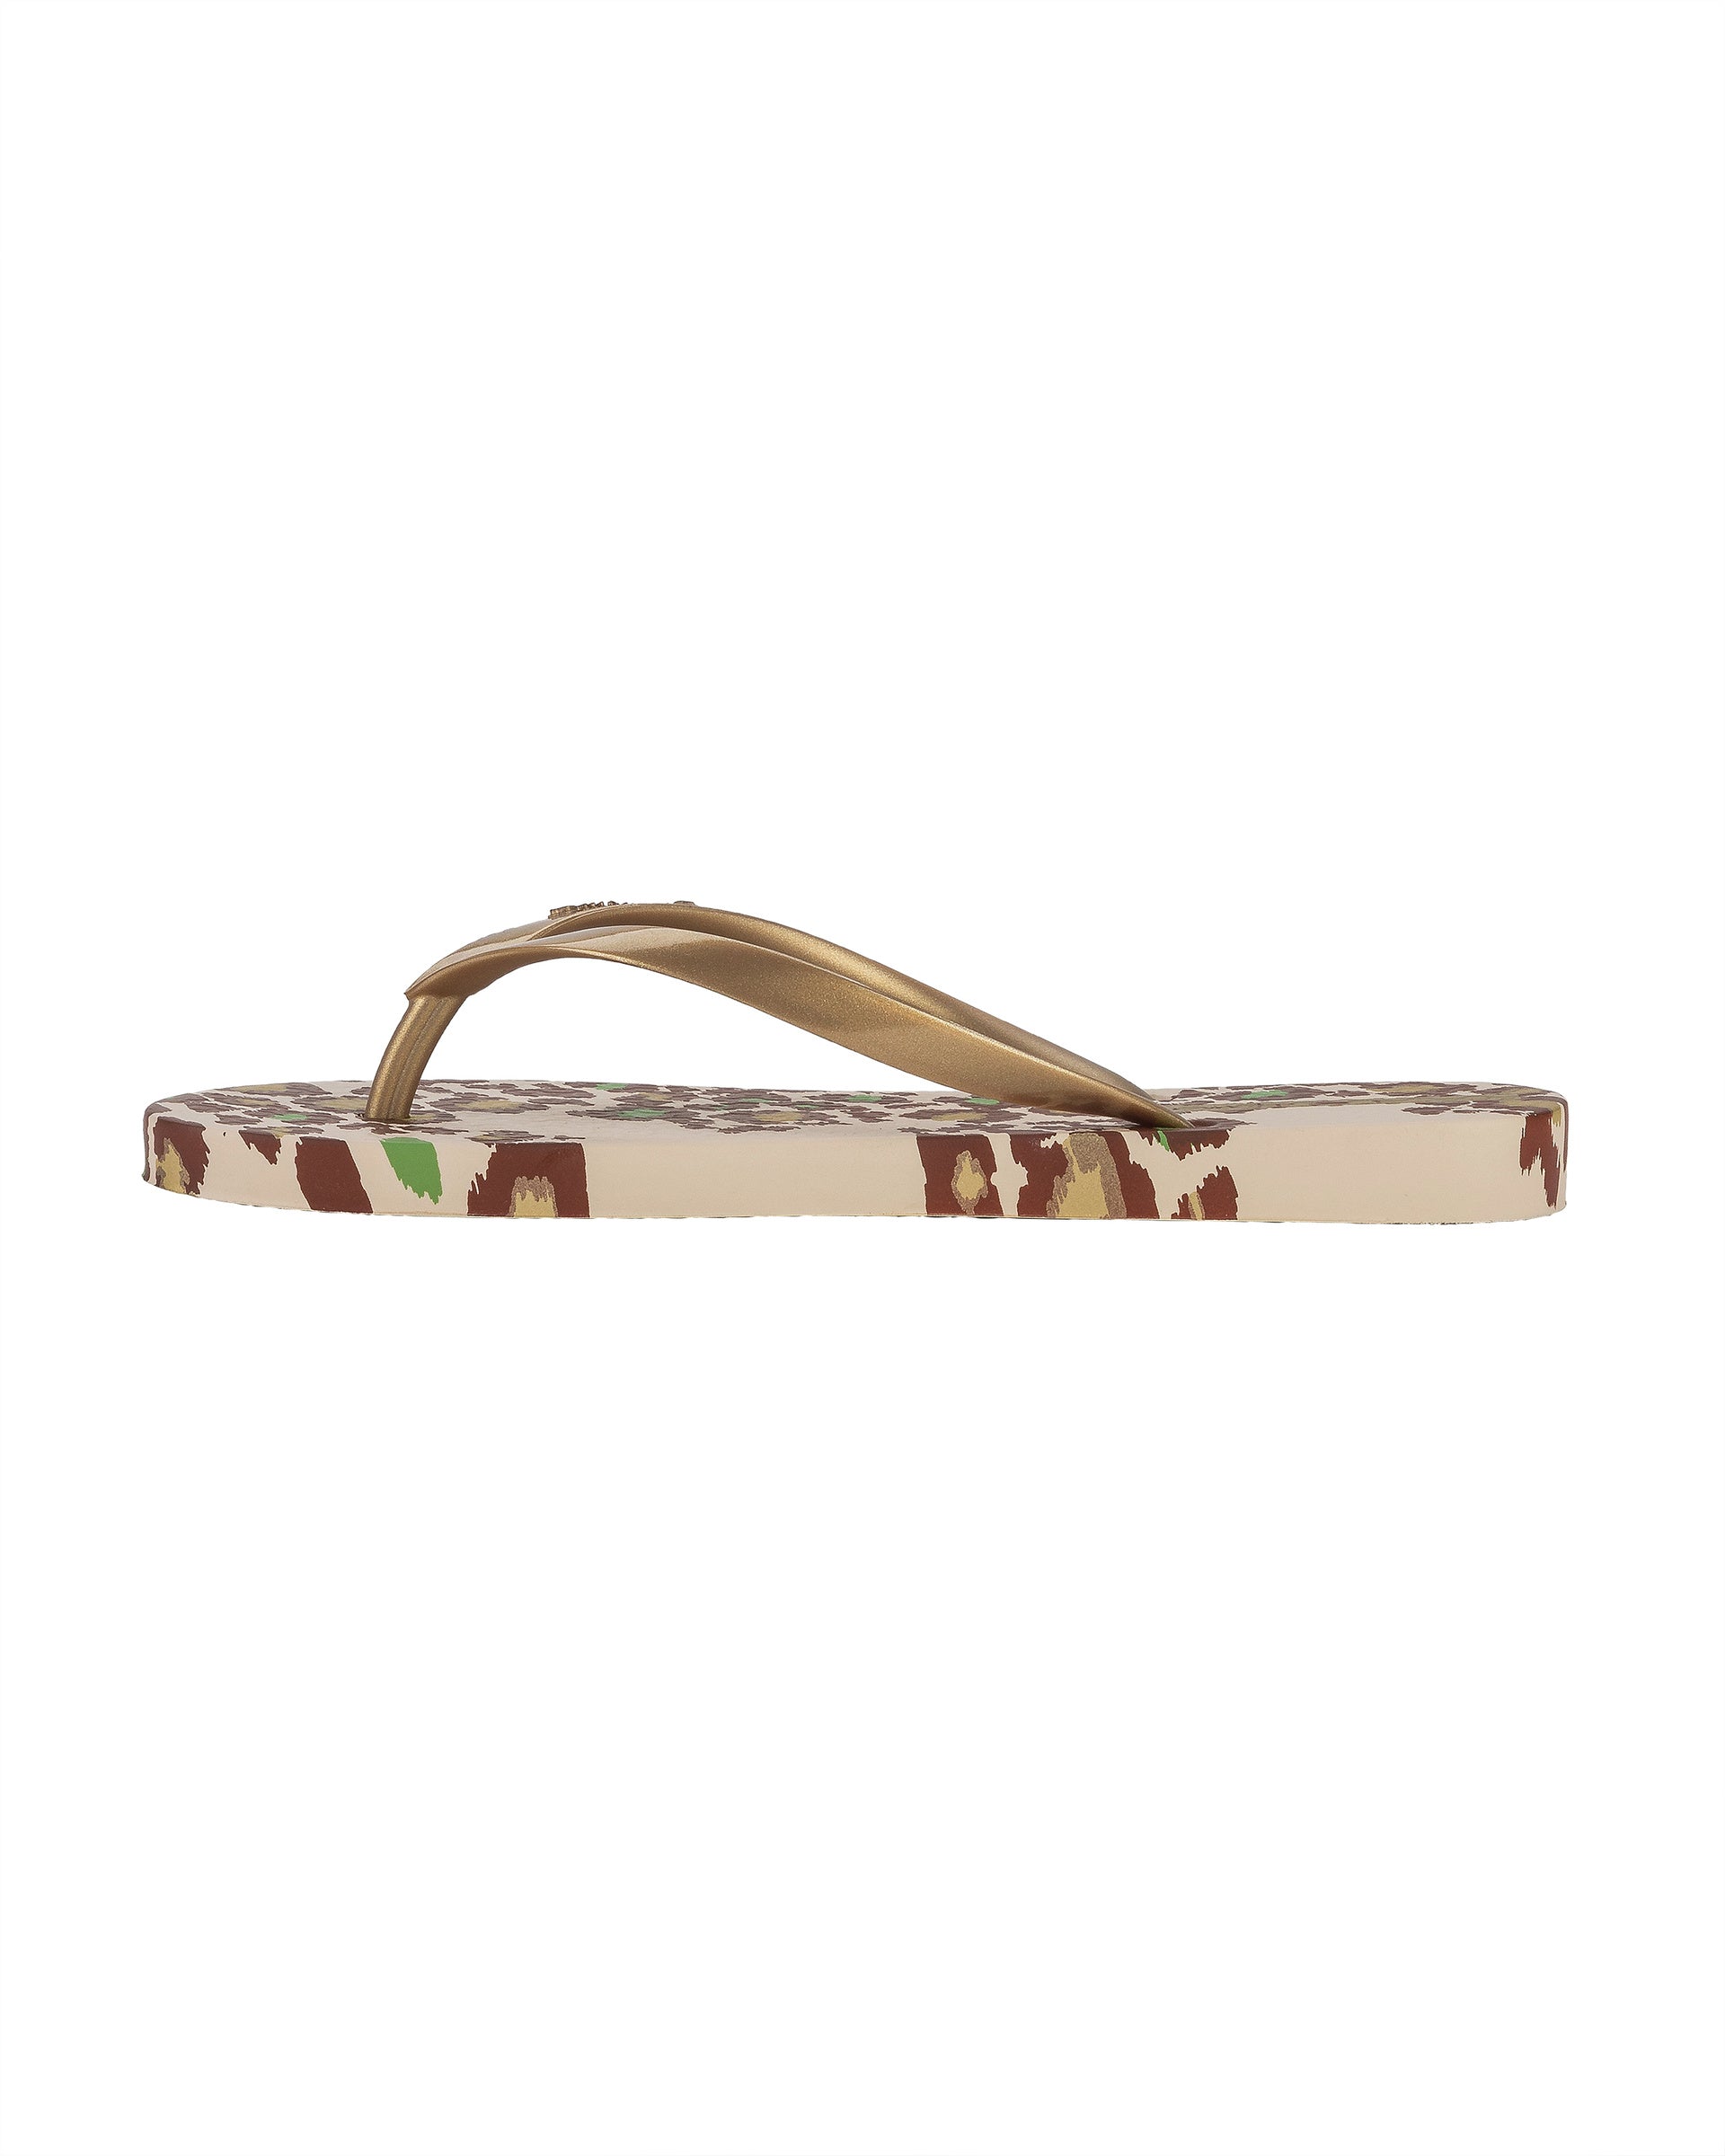 Inner side view of a beige Ipanema Animal Print women's flip flop with glitter gold straps and leopard sole print.